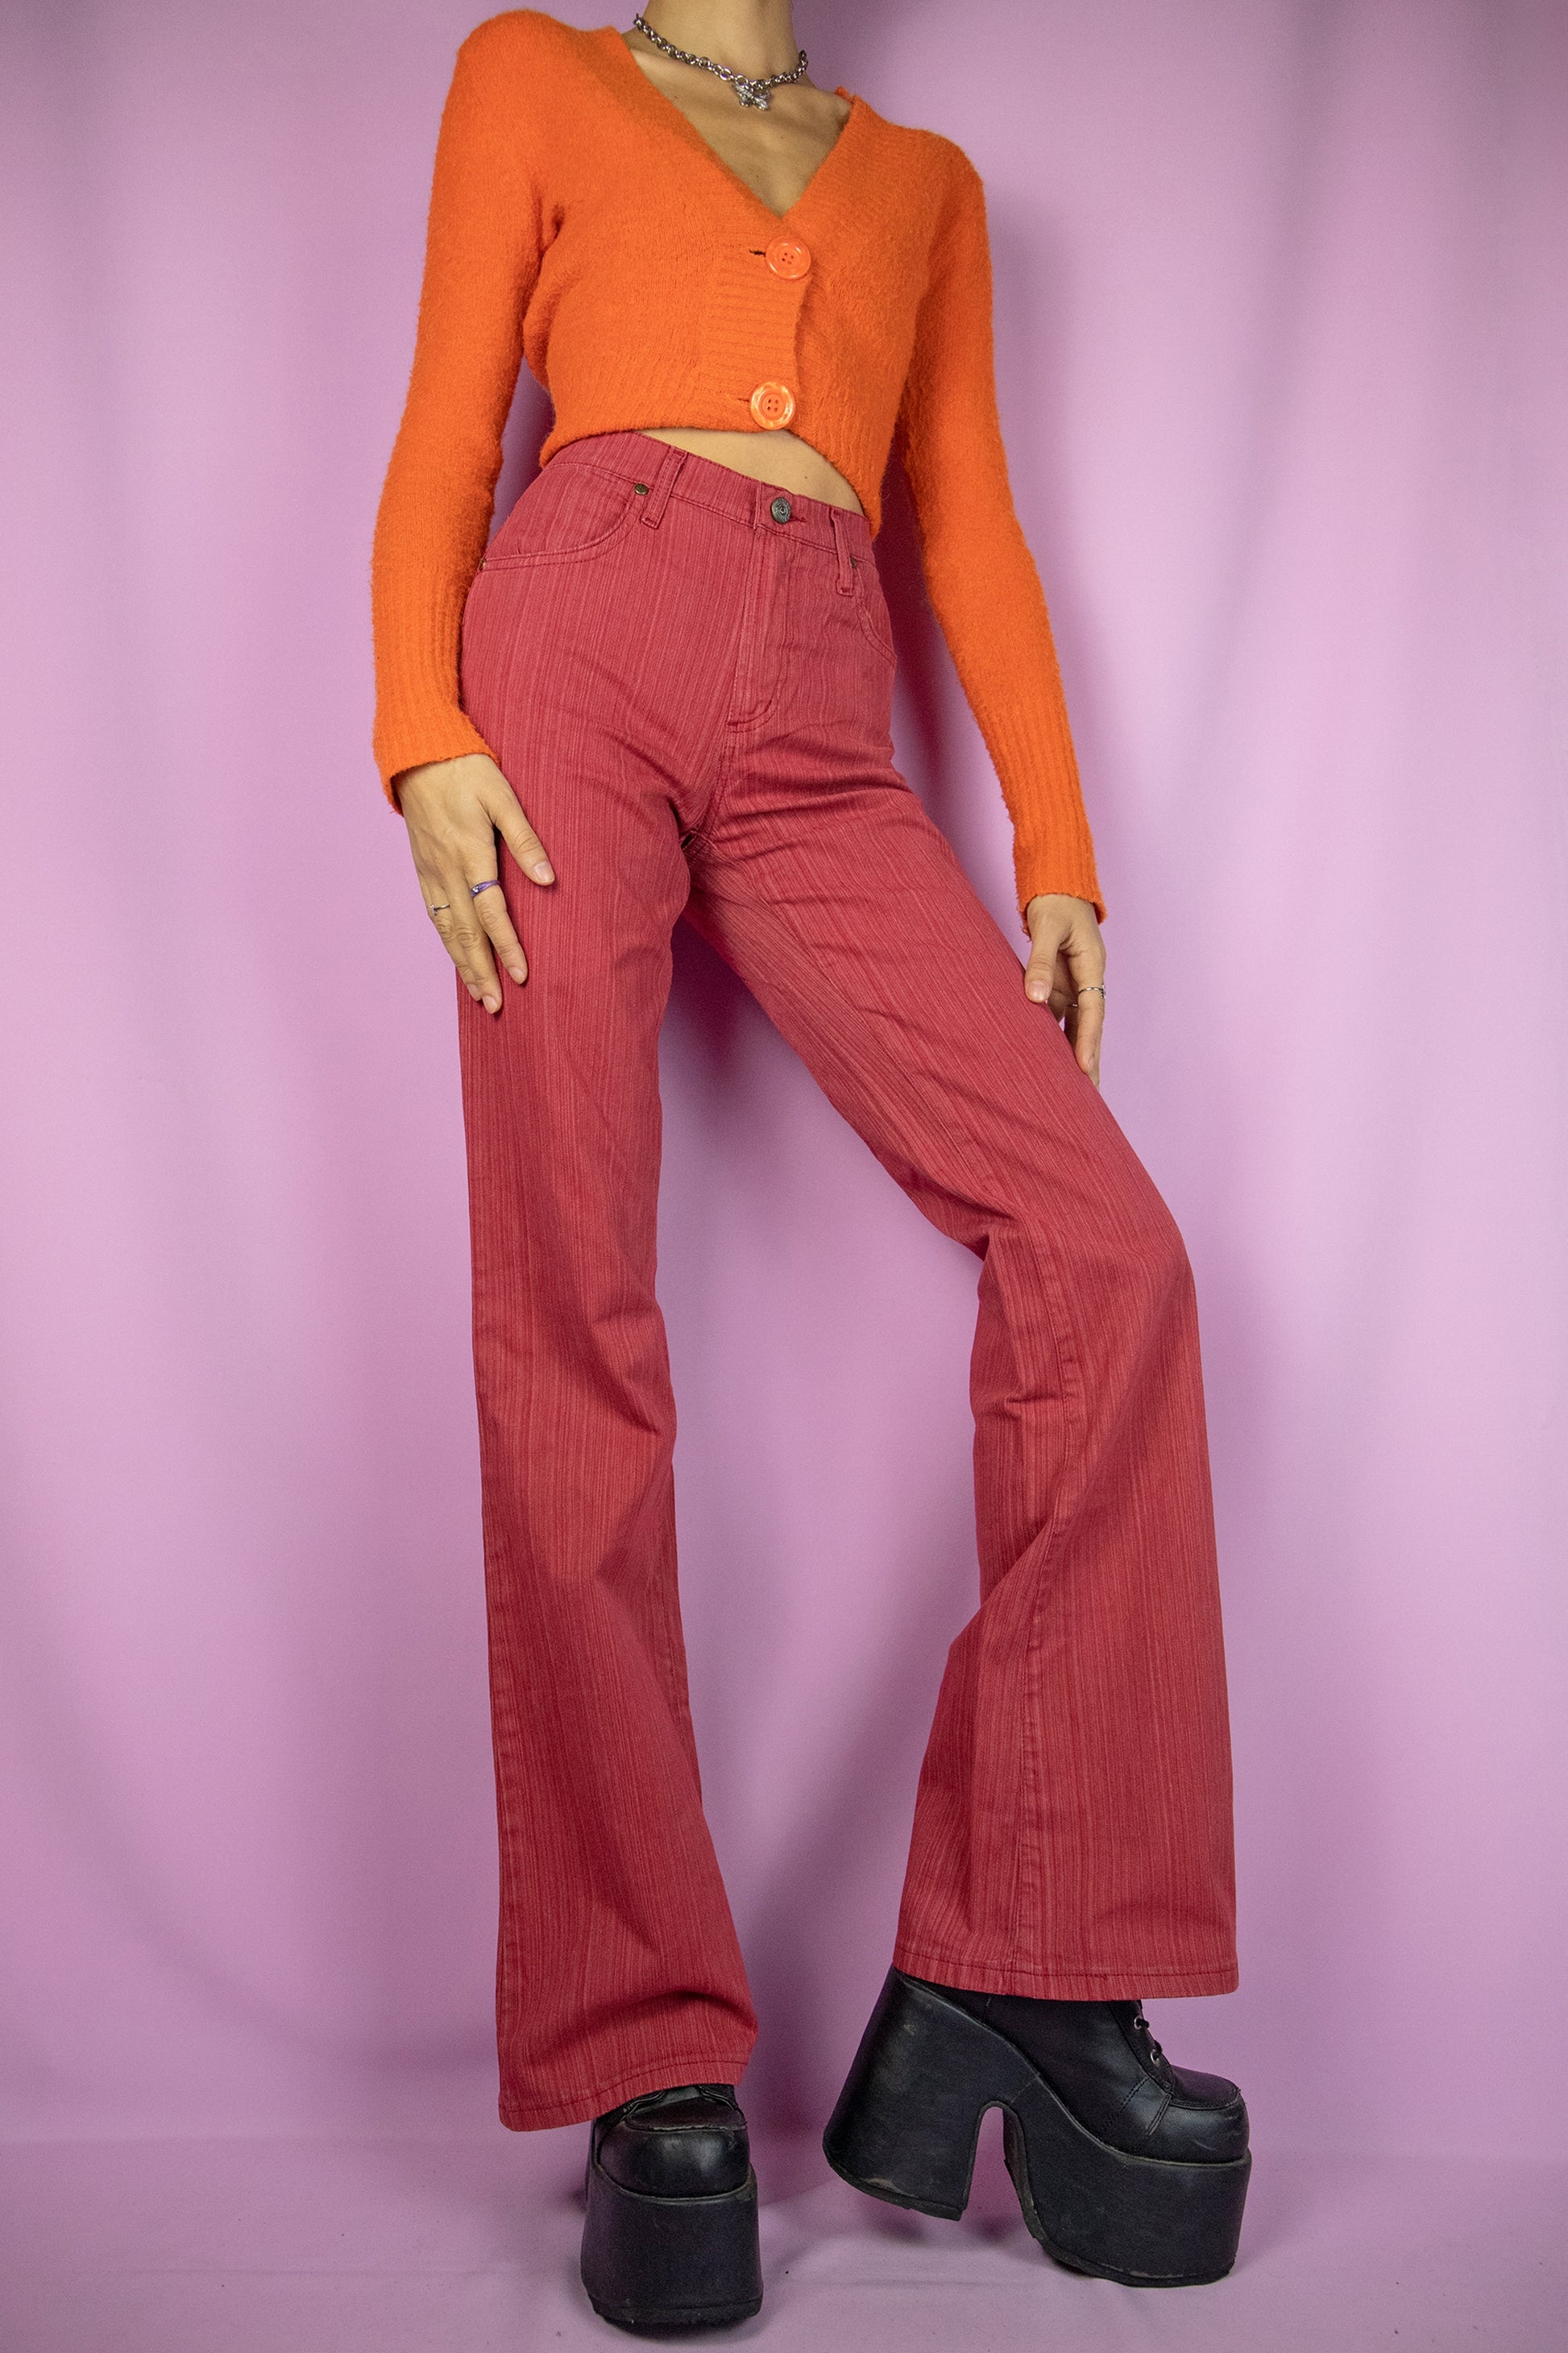 The Y2K Red Flare Jeans are vintage 2000s high-waisted, slightly stretchy pants with pockets and a zipper closure. Made in Spain. Excellent vintage condition.